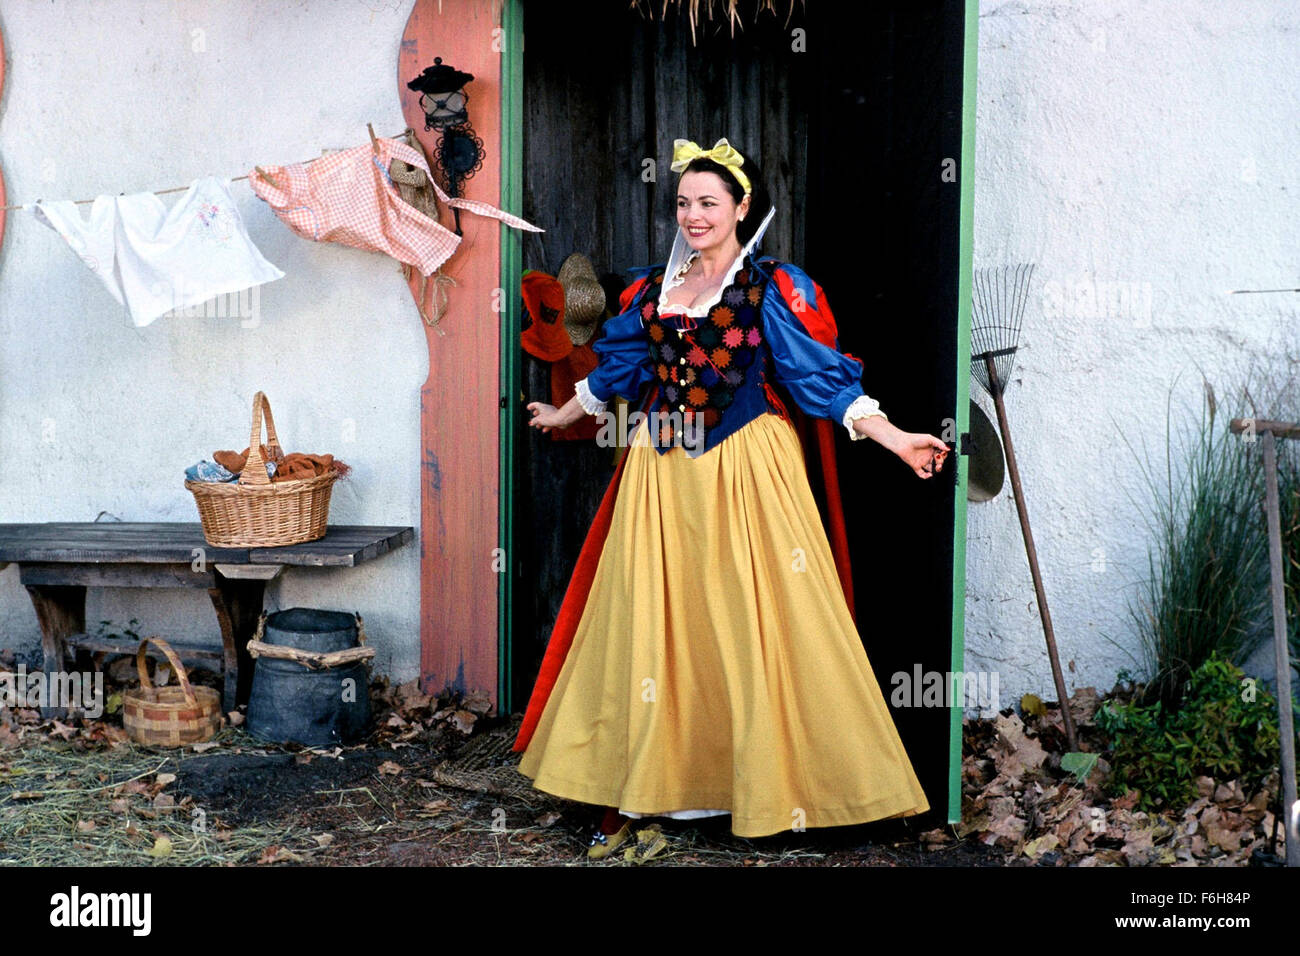 Apr 07, 2002; Montreal, Quebec, CANADA; LOUISE PORTAL stars as Blanche- Neige in the family fantasy/comedy 'Alice's Odyssey - L'Odyssee d'Alice Tremblay' directed by Denise Filiatrault. Stock Photo